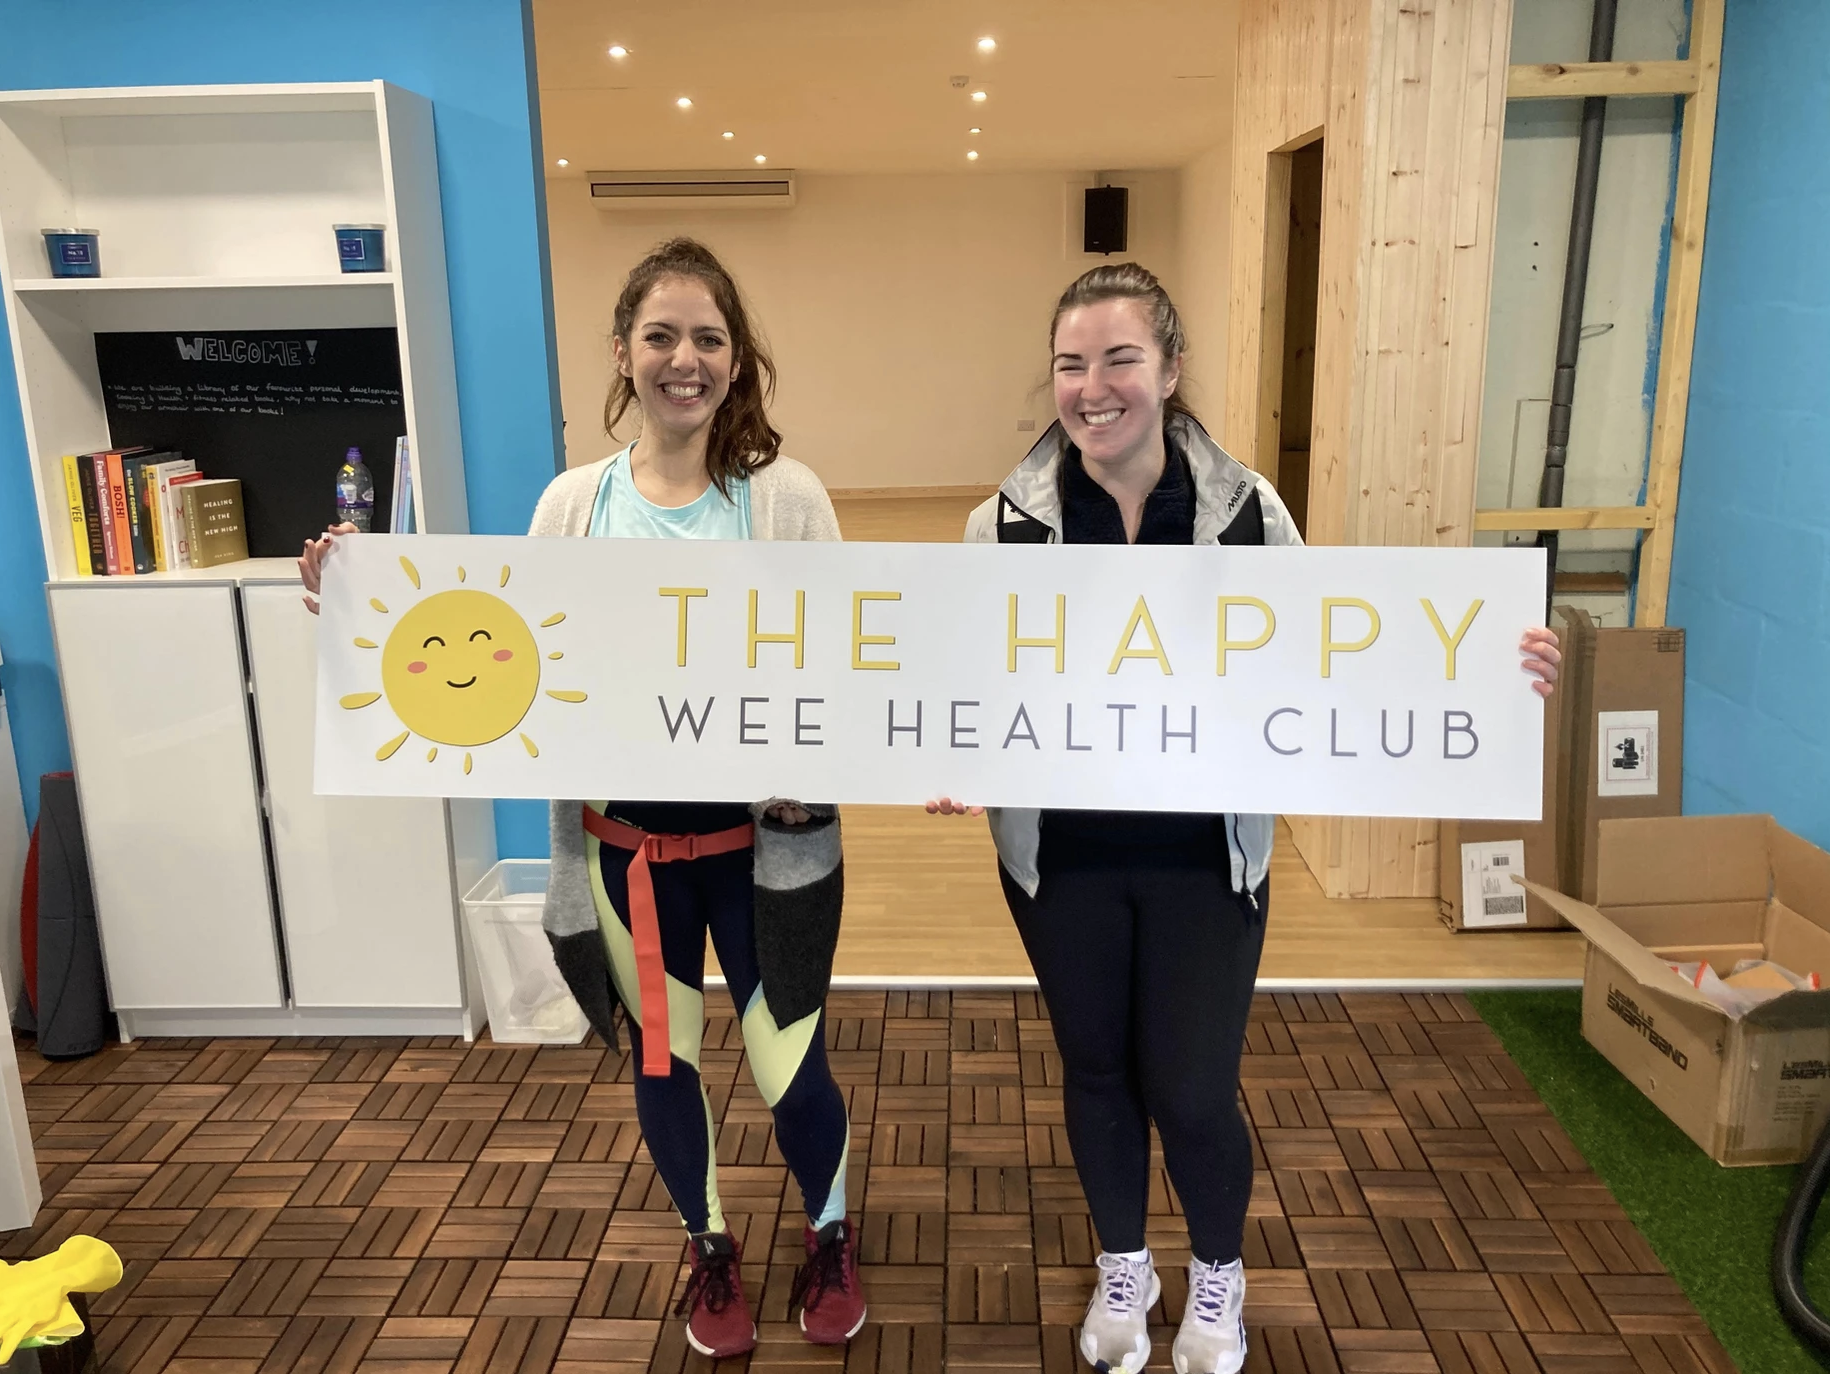 How The Happy Wee Health Club used AV technology to bring together a community